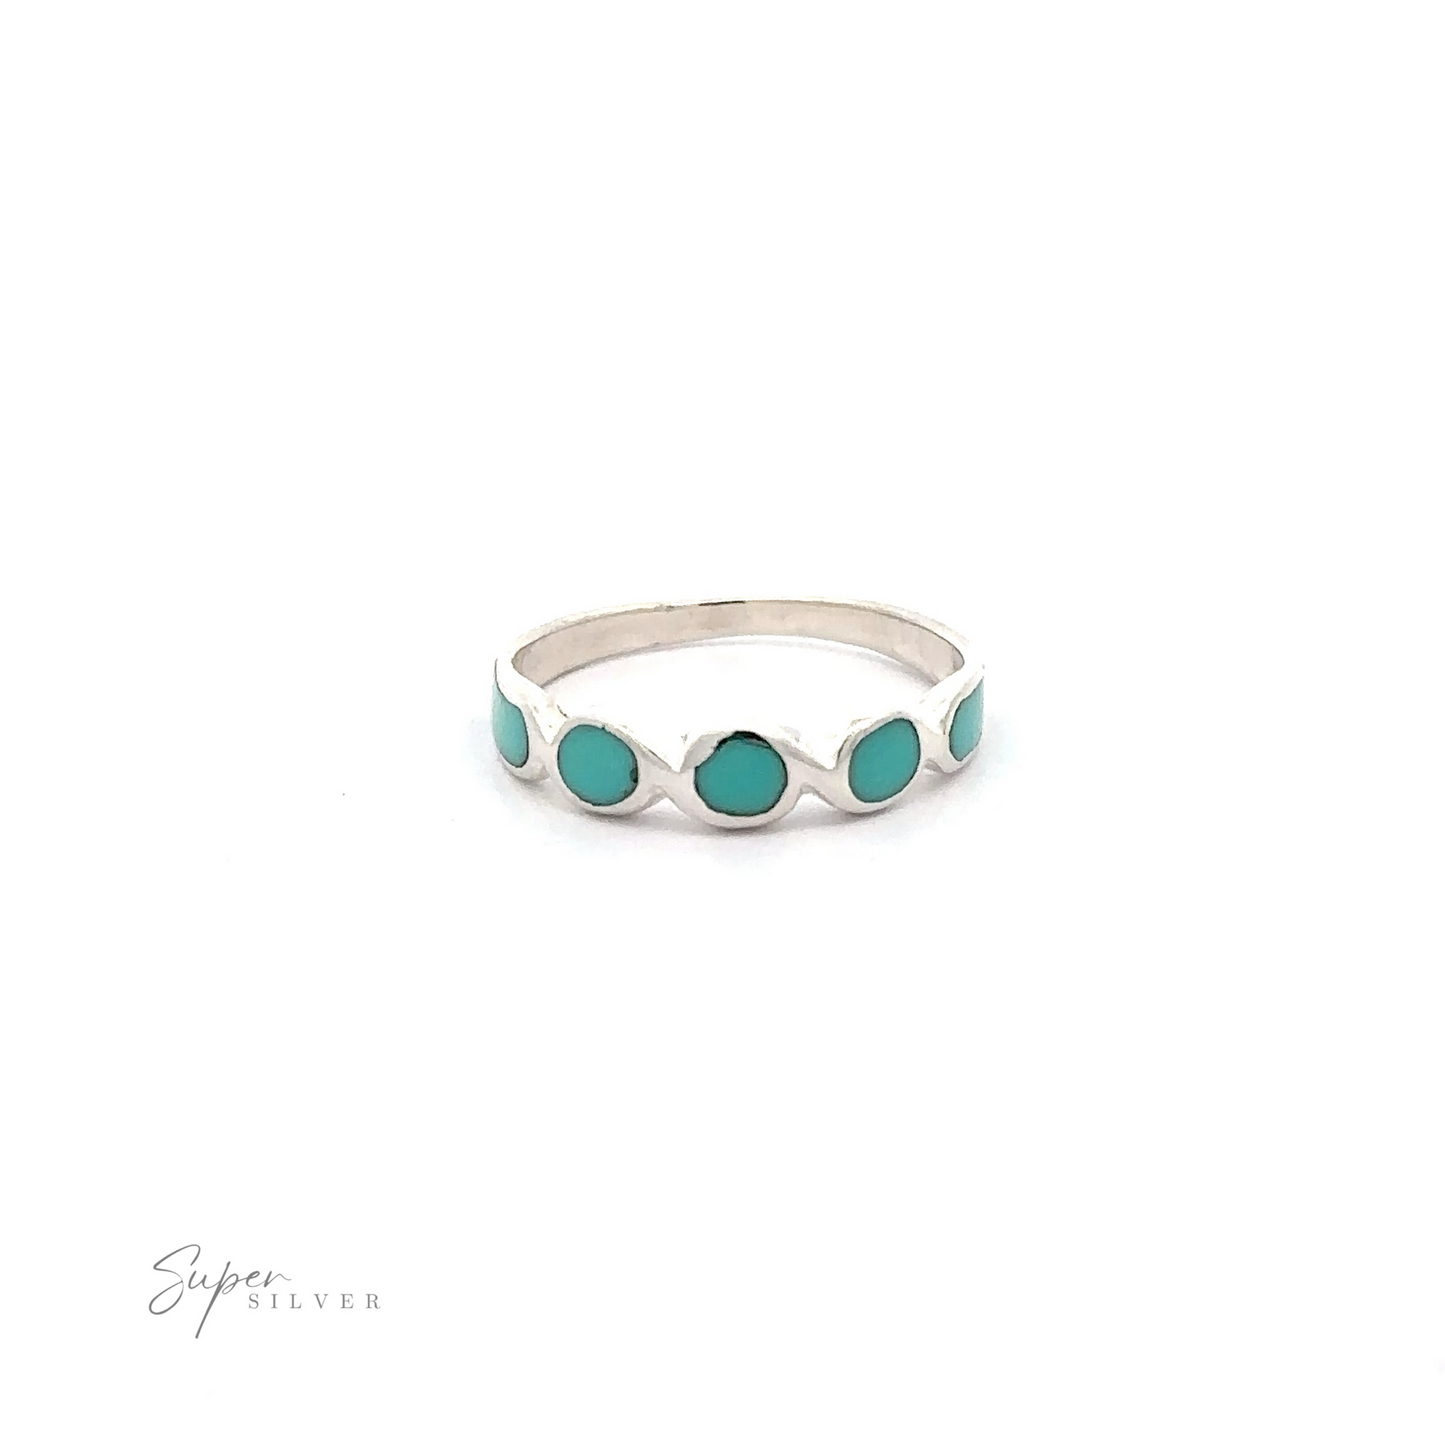 A Sterling Silver Inlaid Turquoise Oval Crossover Patterned Ring.